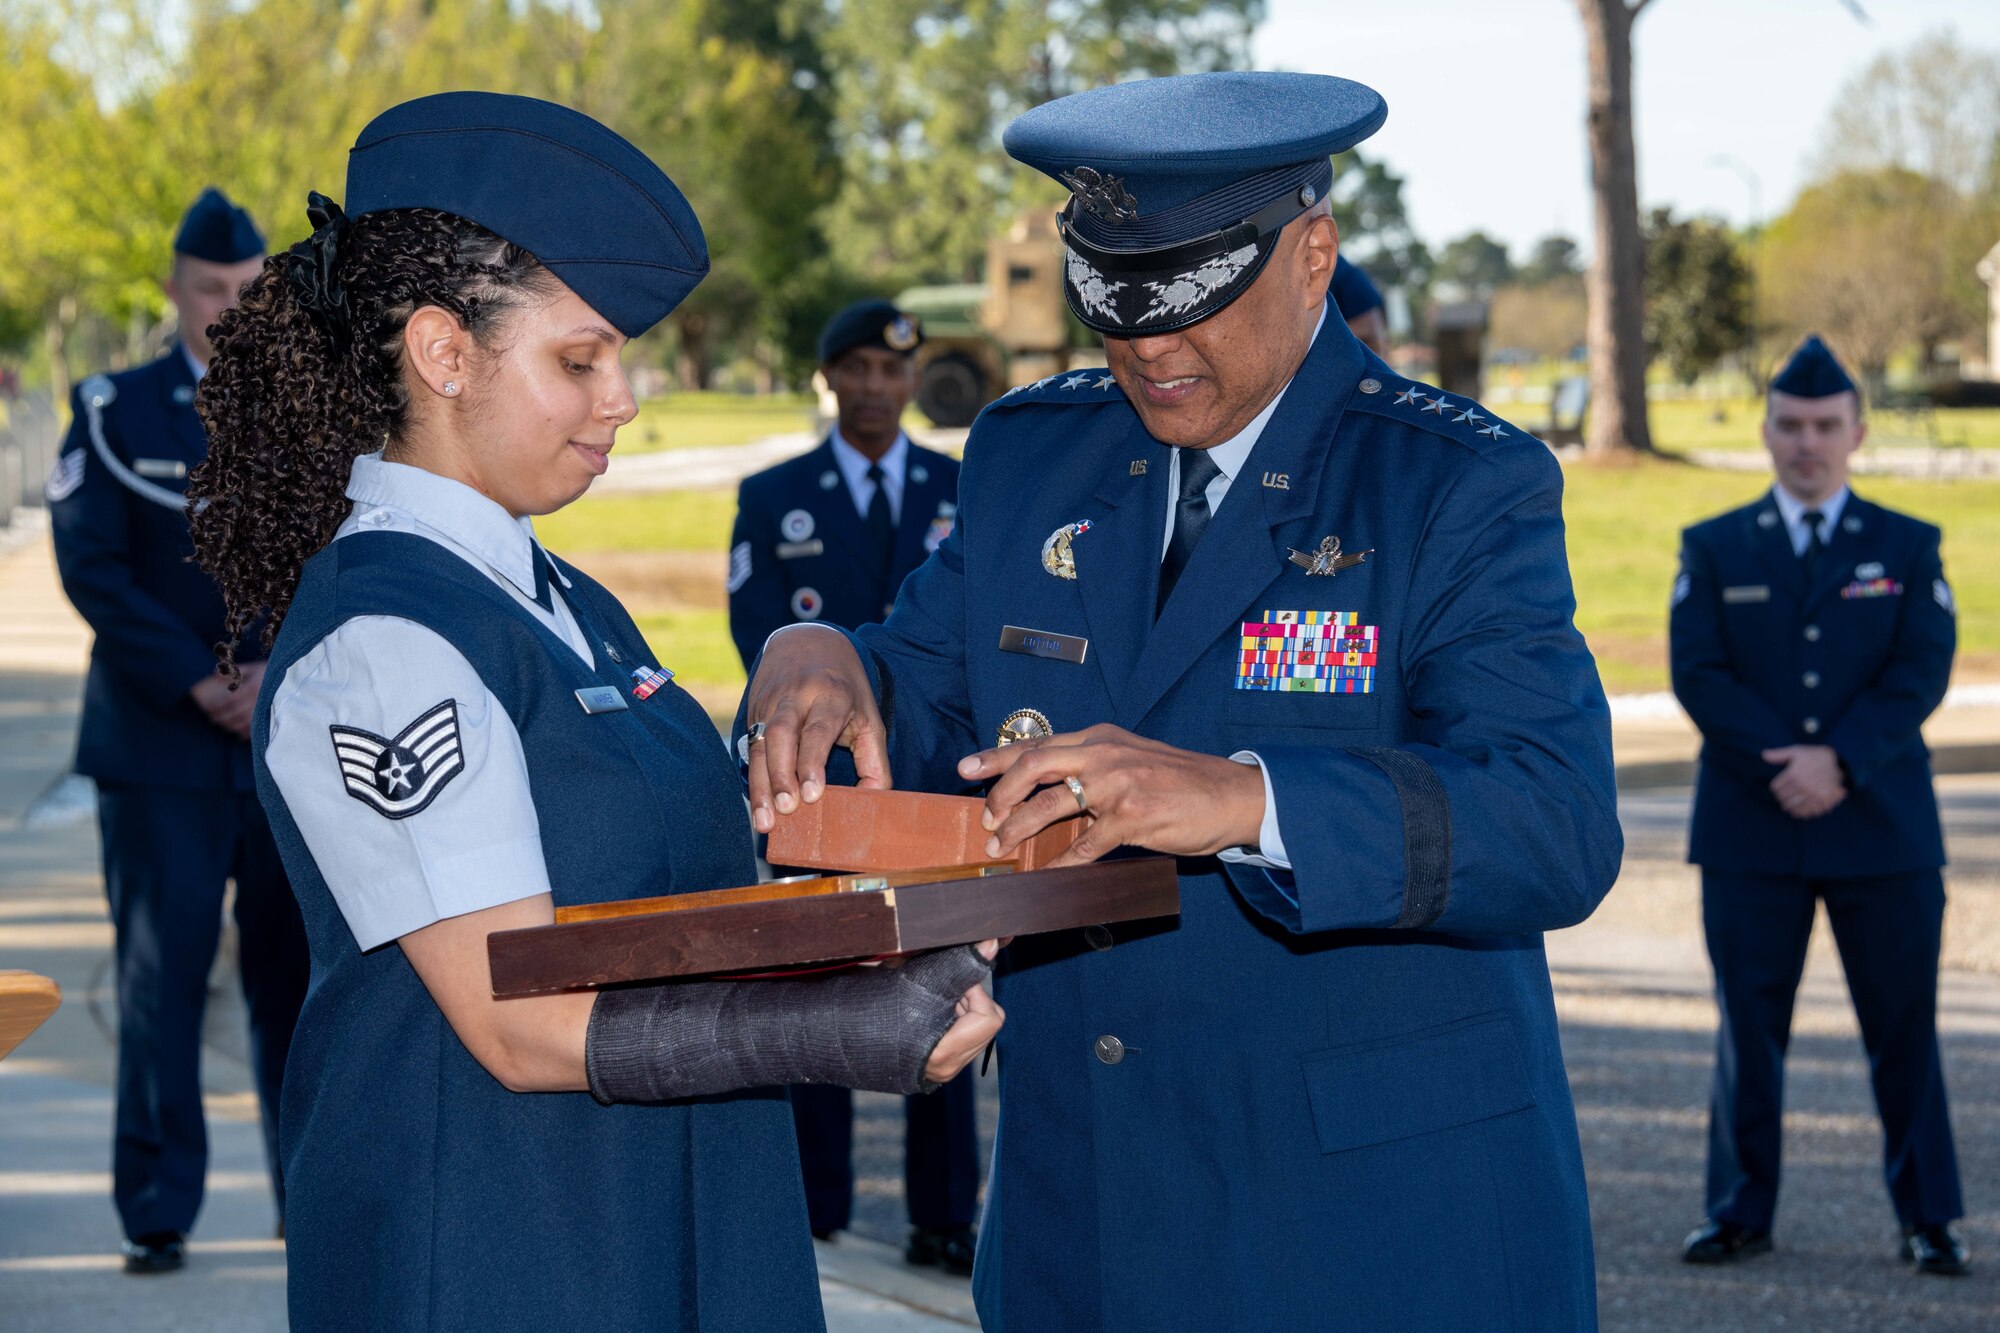 Staff Sgt. Khandi Wagner presents a brick to Gen. Anthony J. Cotton, Commander, U.S. Air Force Global Strike Command and Commander, Air Forces Strategic-Air, U.S. Strategic Command, to be placed at the Enlisted Heritage Research Institute, Apr. 1, 2022. Cotton was honored for his support for the enlisted corps